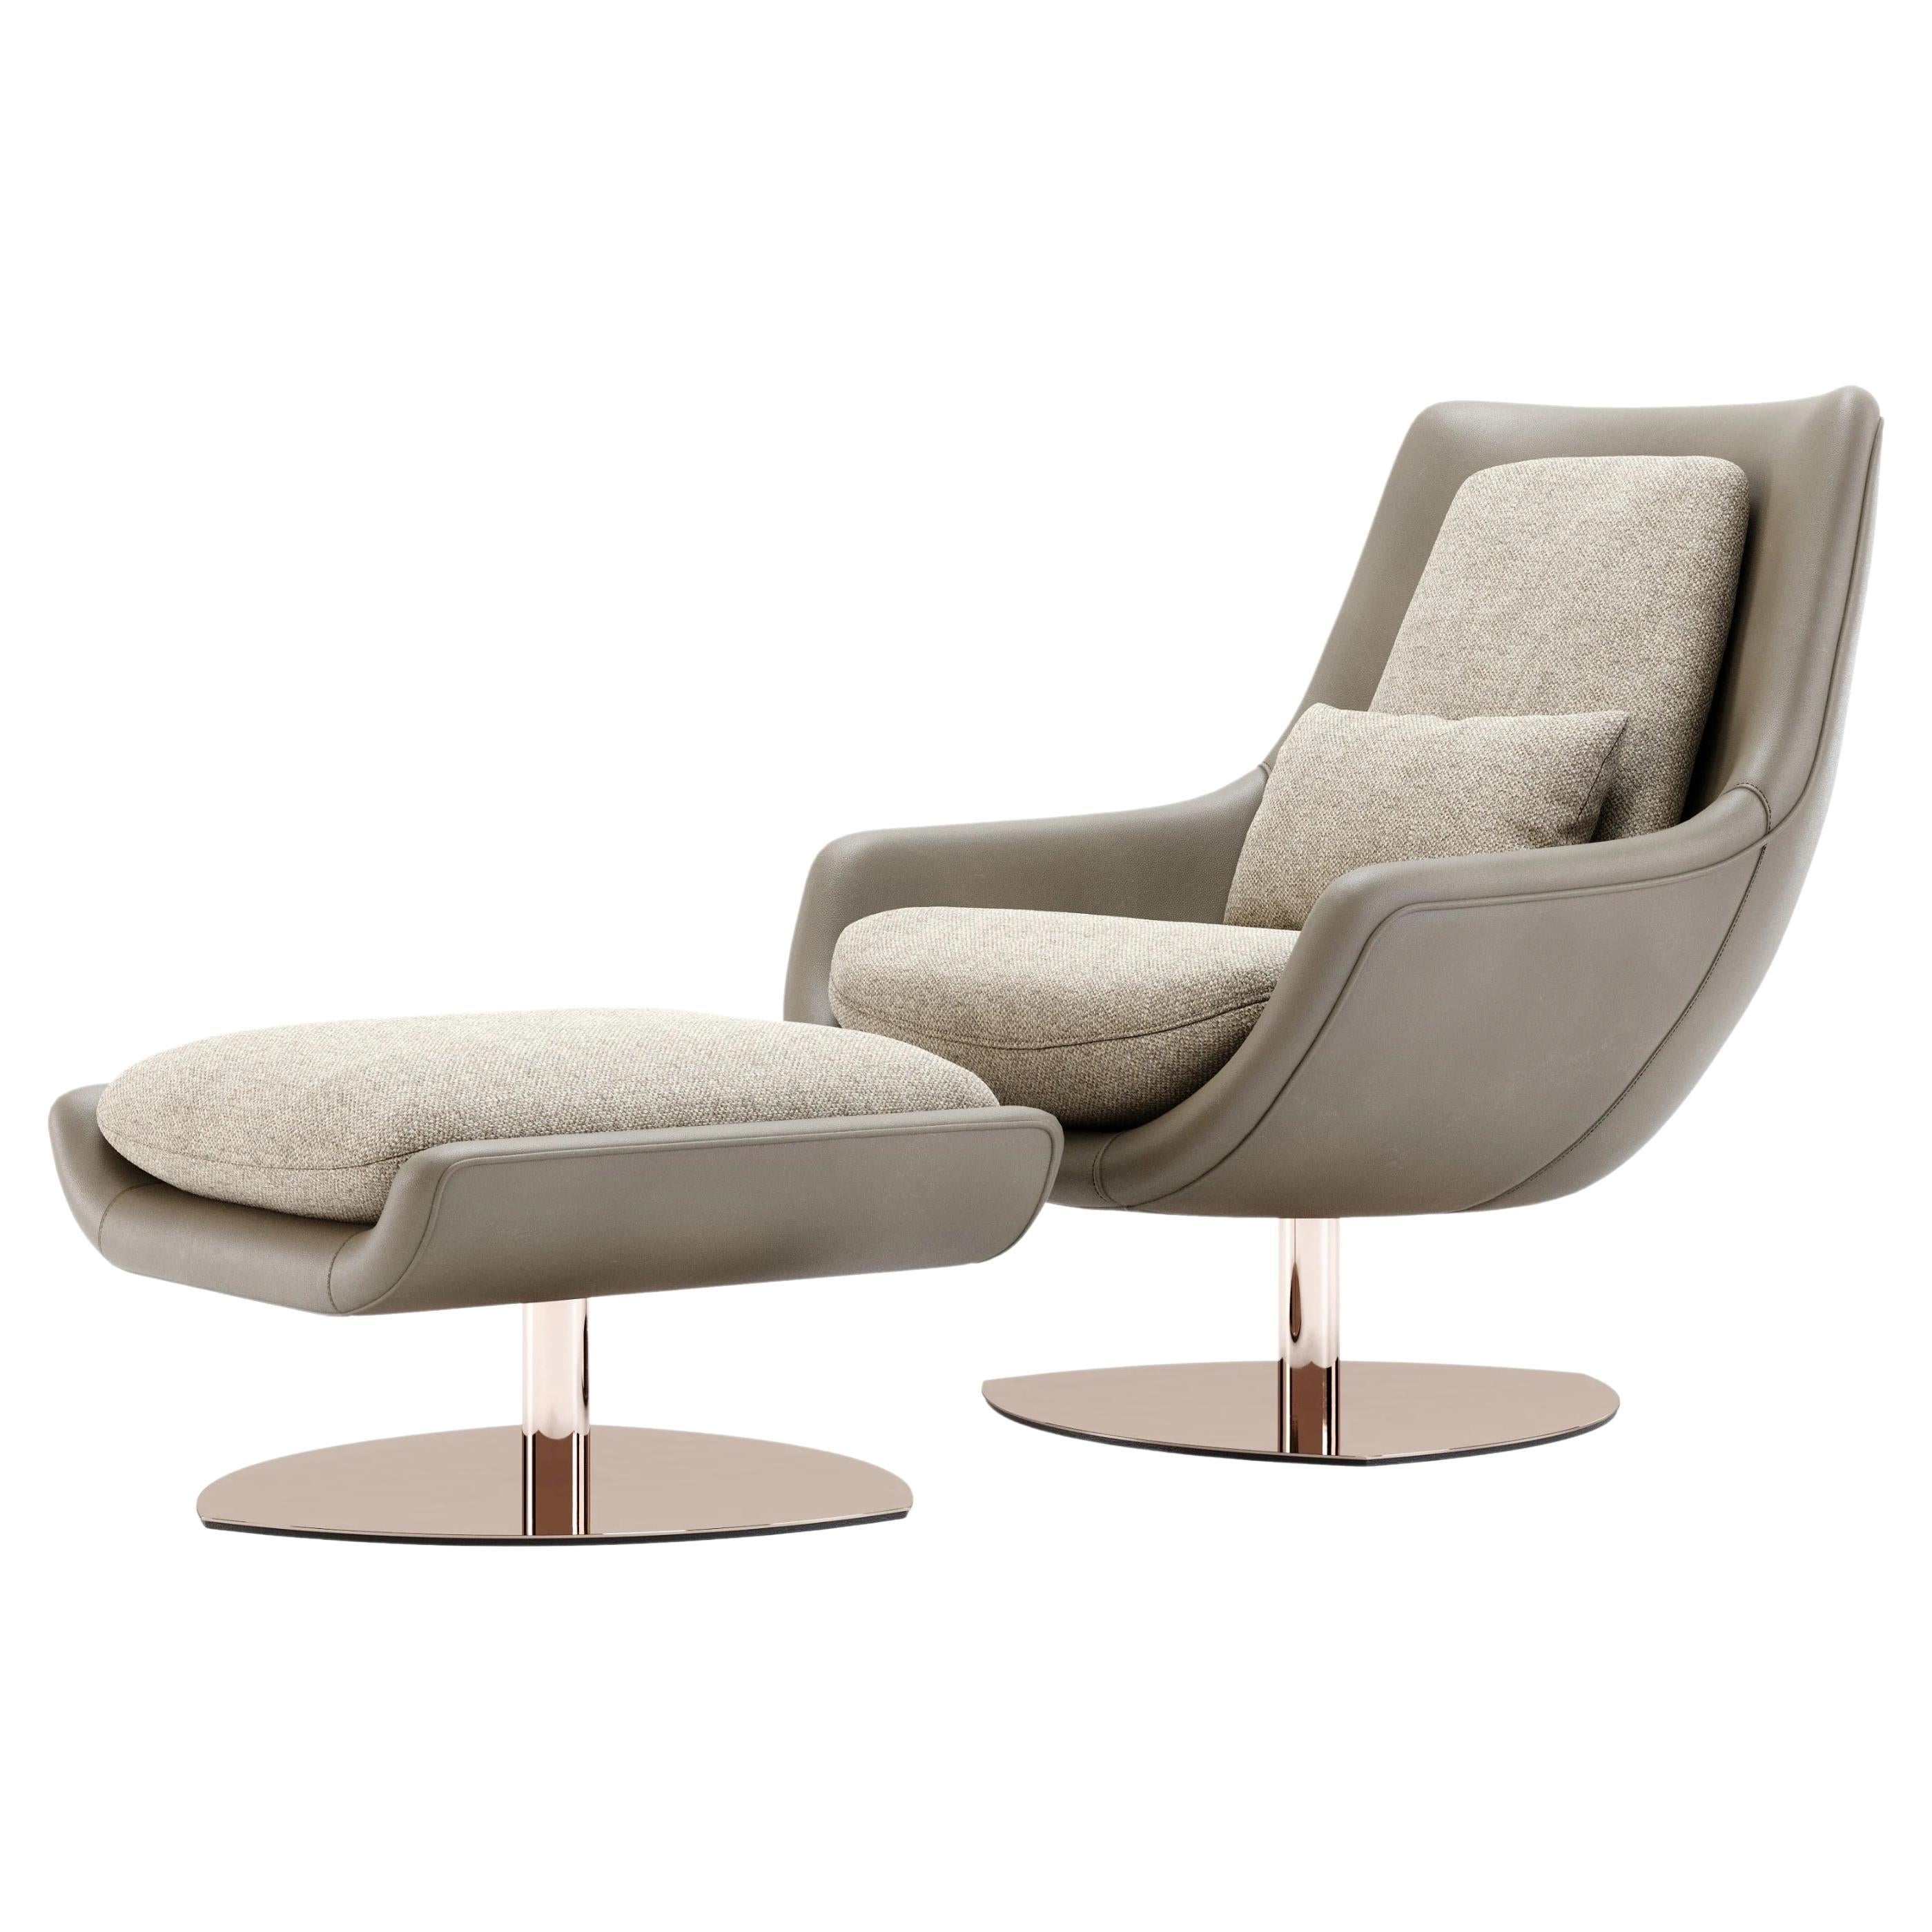 Swivel lounge chair with a curved body shape. The metallic base can swivel 360 degrees. 

Shown here in Leather and Columbia Toffee Fabric.
Stainless steel base in polished stainless steel. 
See photos metal base colors. 

Available in COM,